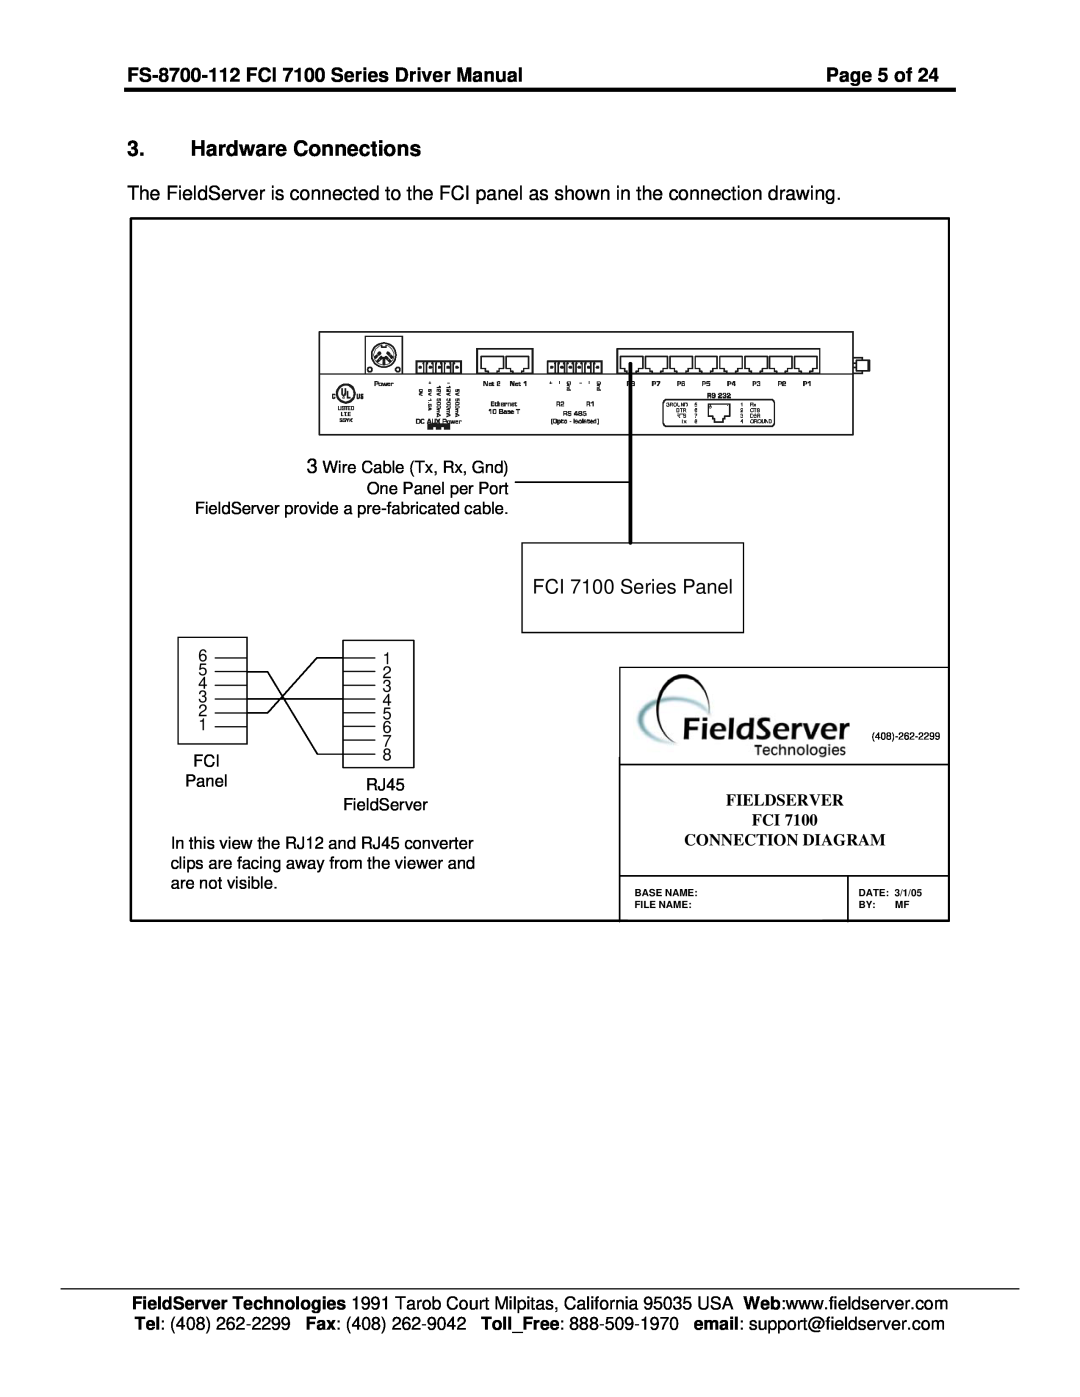 FieldServer Hardware Connections, Page 5 of, FS-8700-112 FCI 7100 Series Driver Manual, FCI 7100 Series Panel 